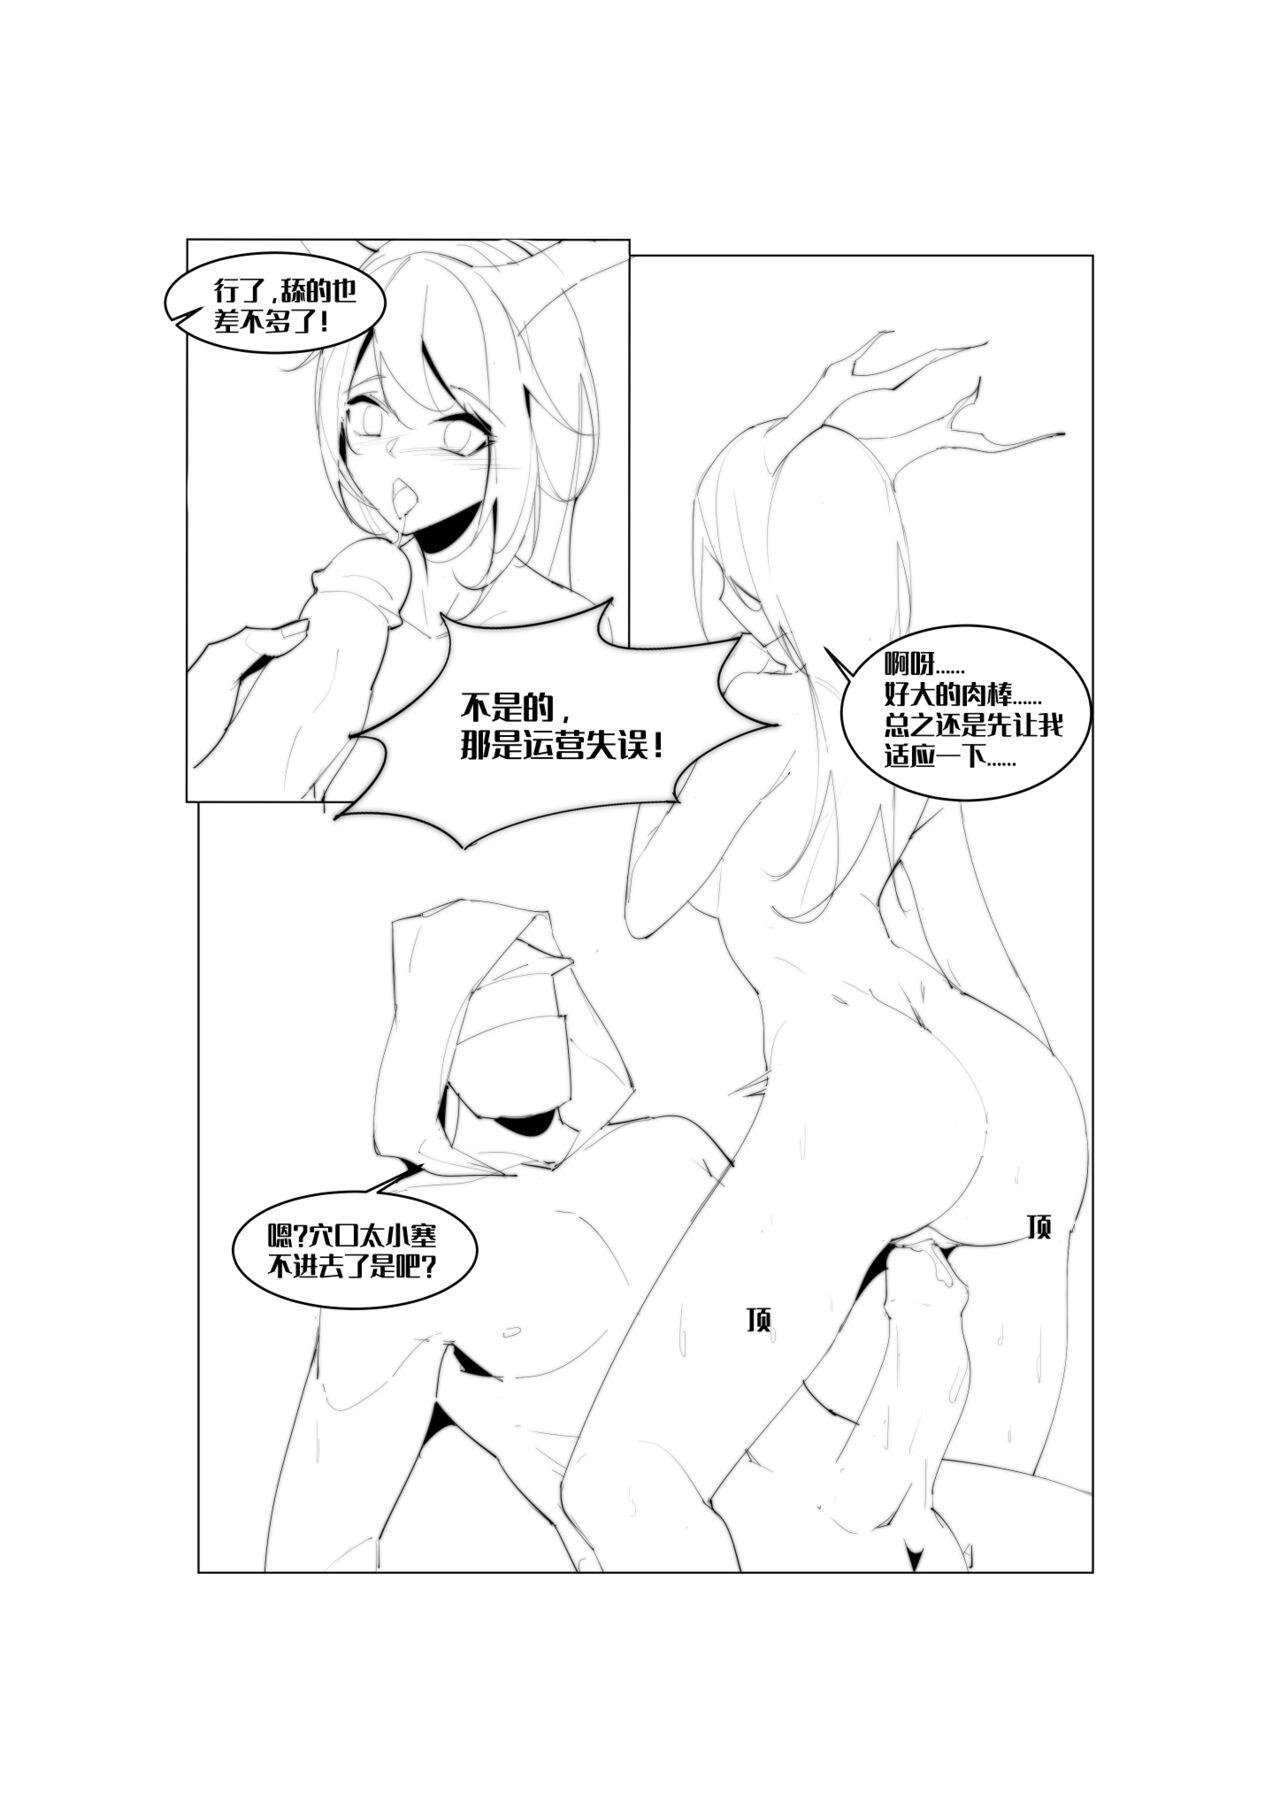 Shower 【playerZ最弱玩家】笨笨鹰角（Arknights） - Arknights Freckles - Page 3